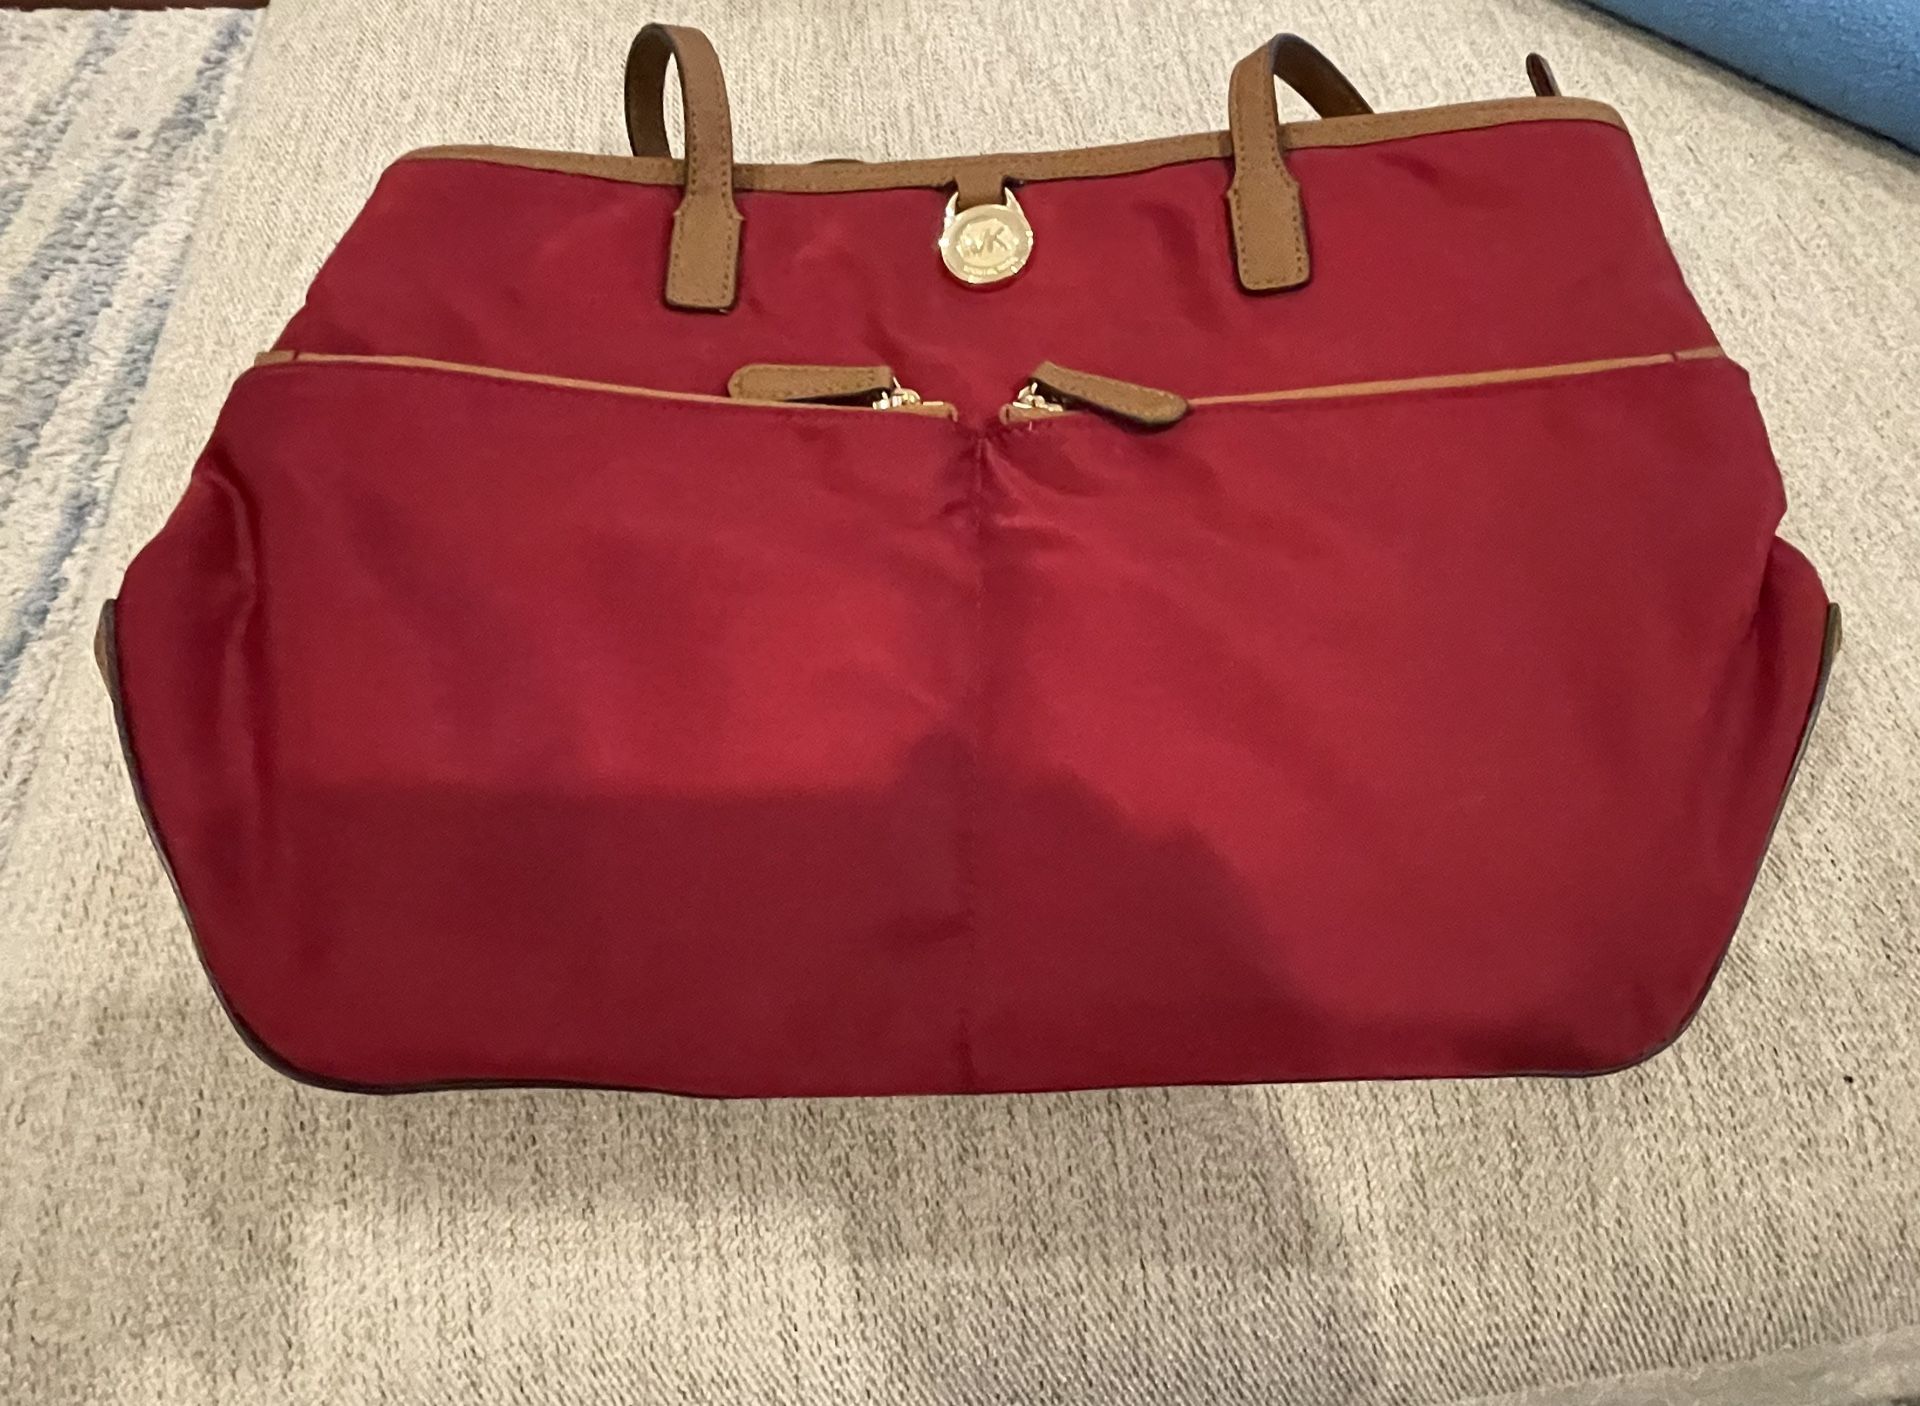 Gently Used Michael Kors Red Leather Purse